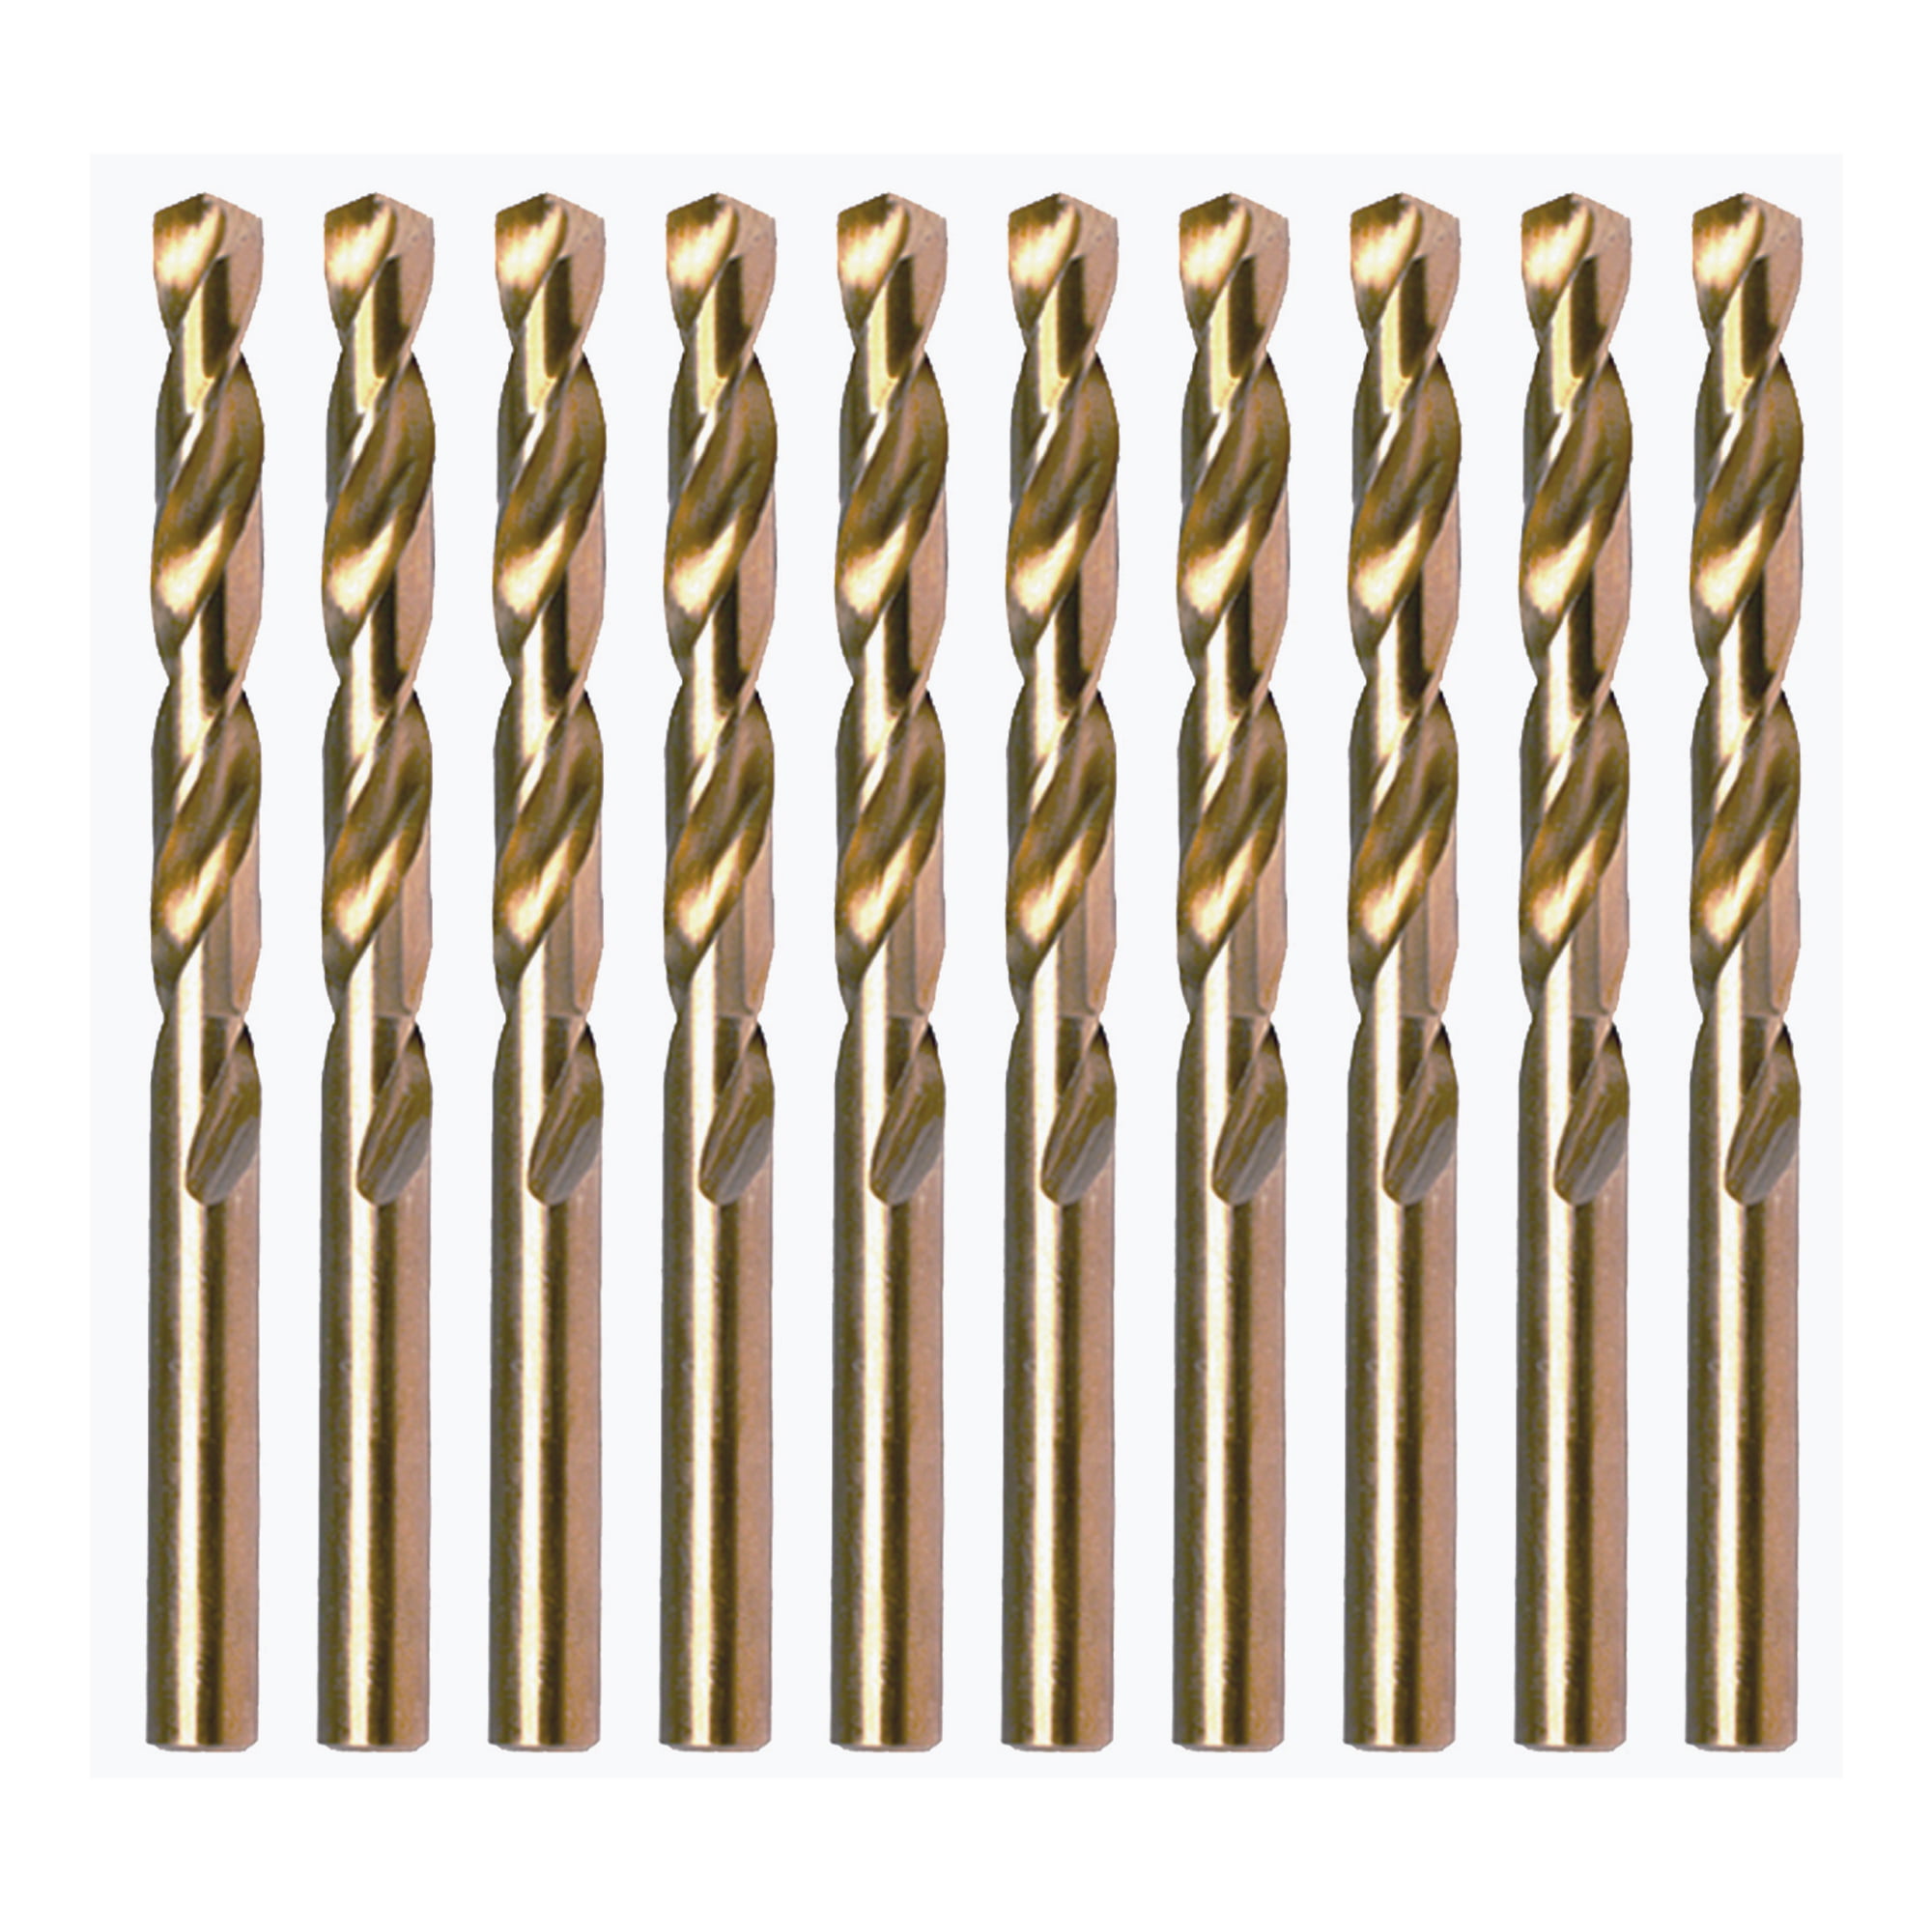 M35 Cobalt Drill Bit Set HSS-CO Drills Set for Drilling on Stainless Steel5.0mm 